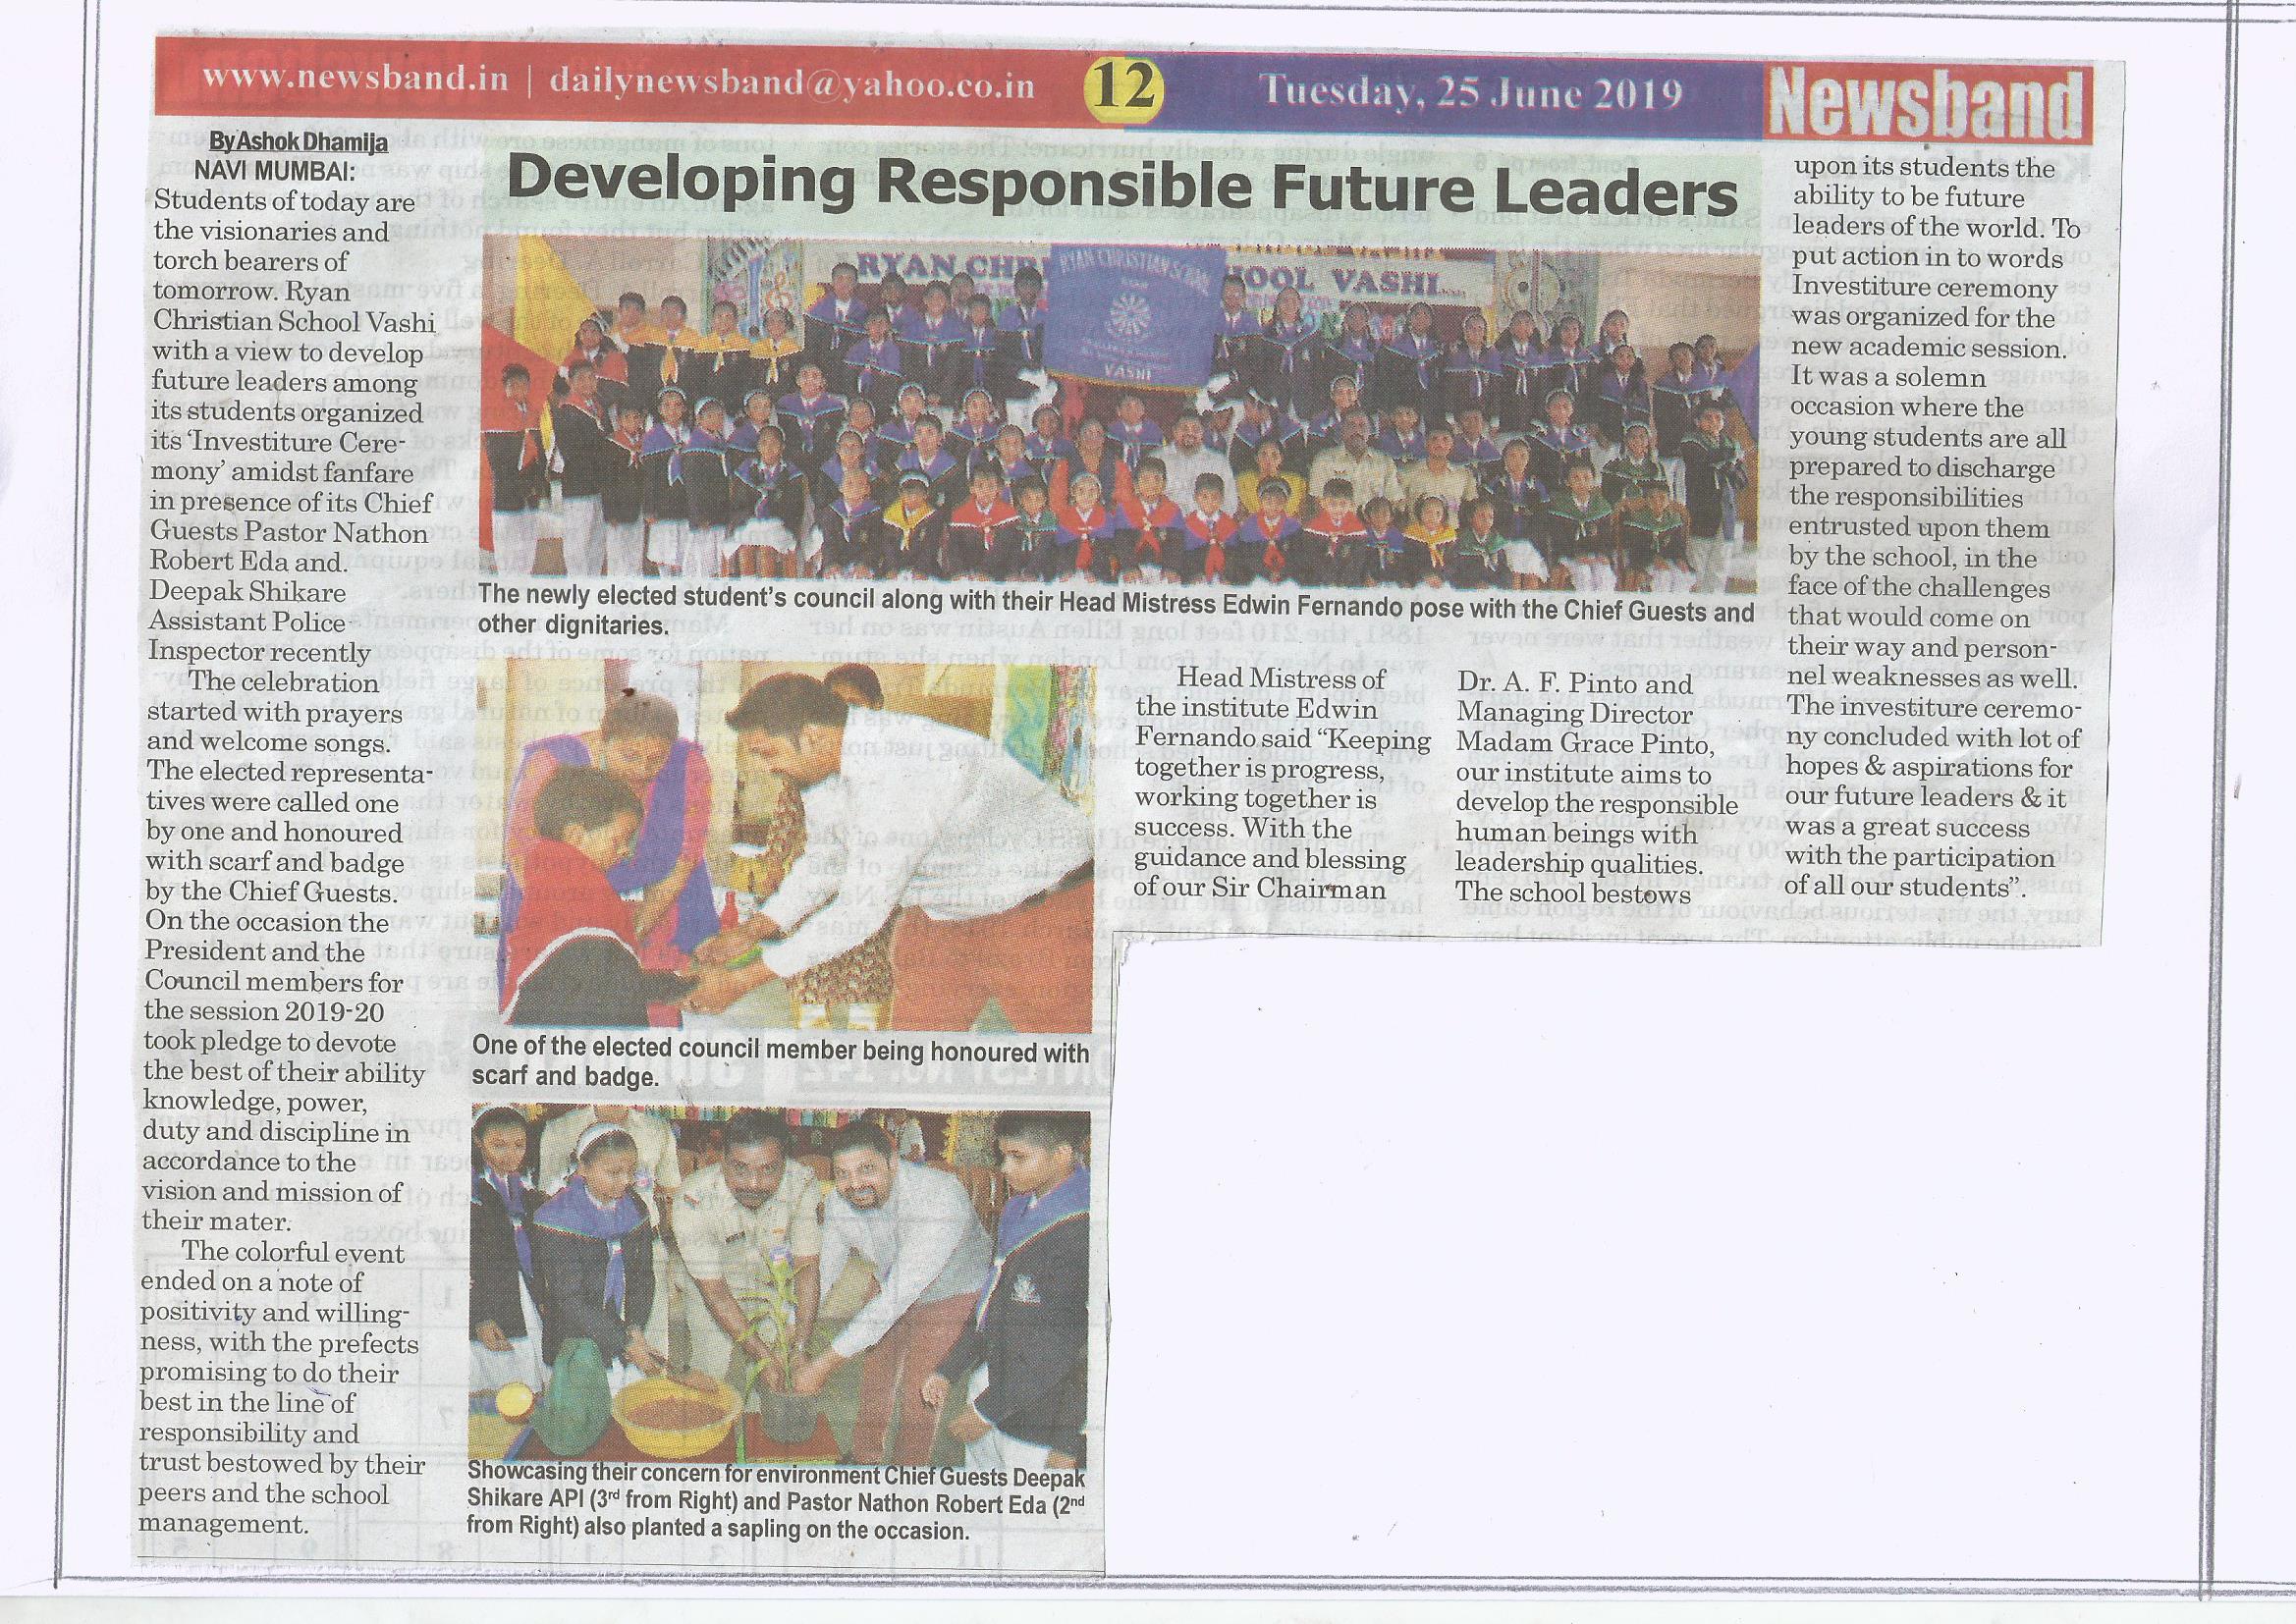 Investiture Ceremony was featured in Newsband